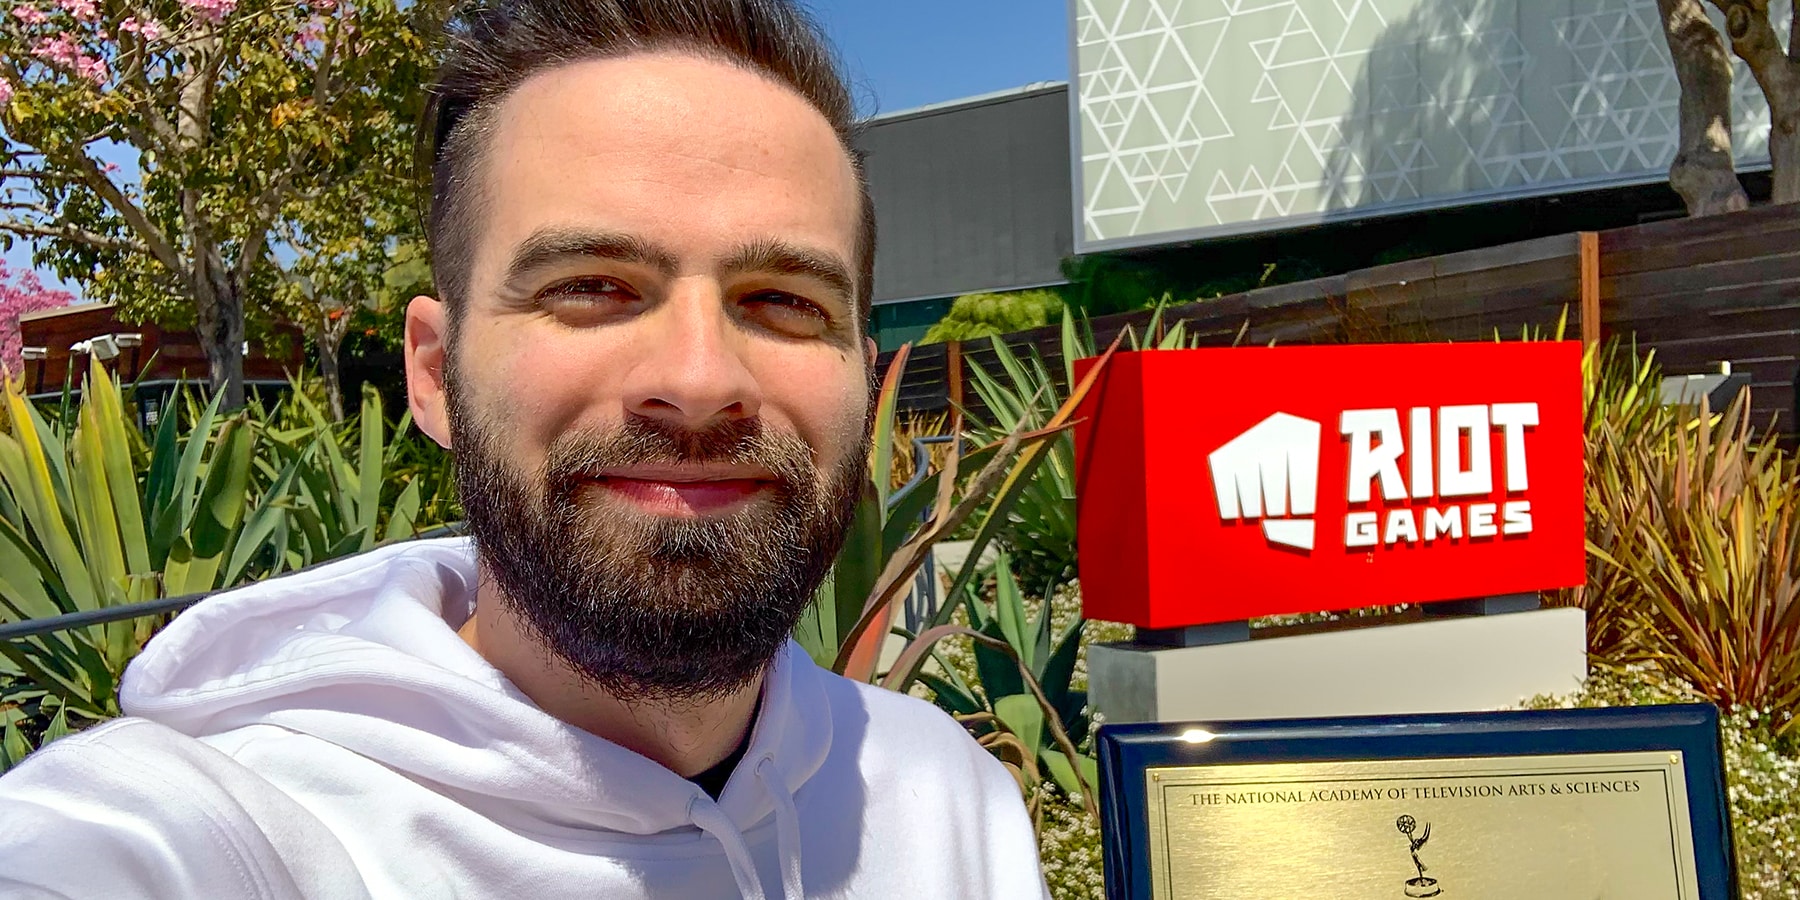 OTC alumnus Jared Smith stands outside Riot Games in Los Angeles